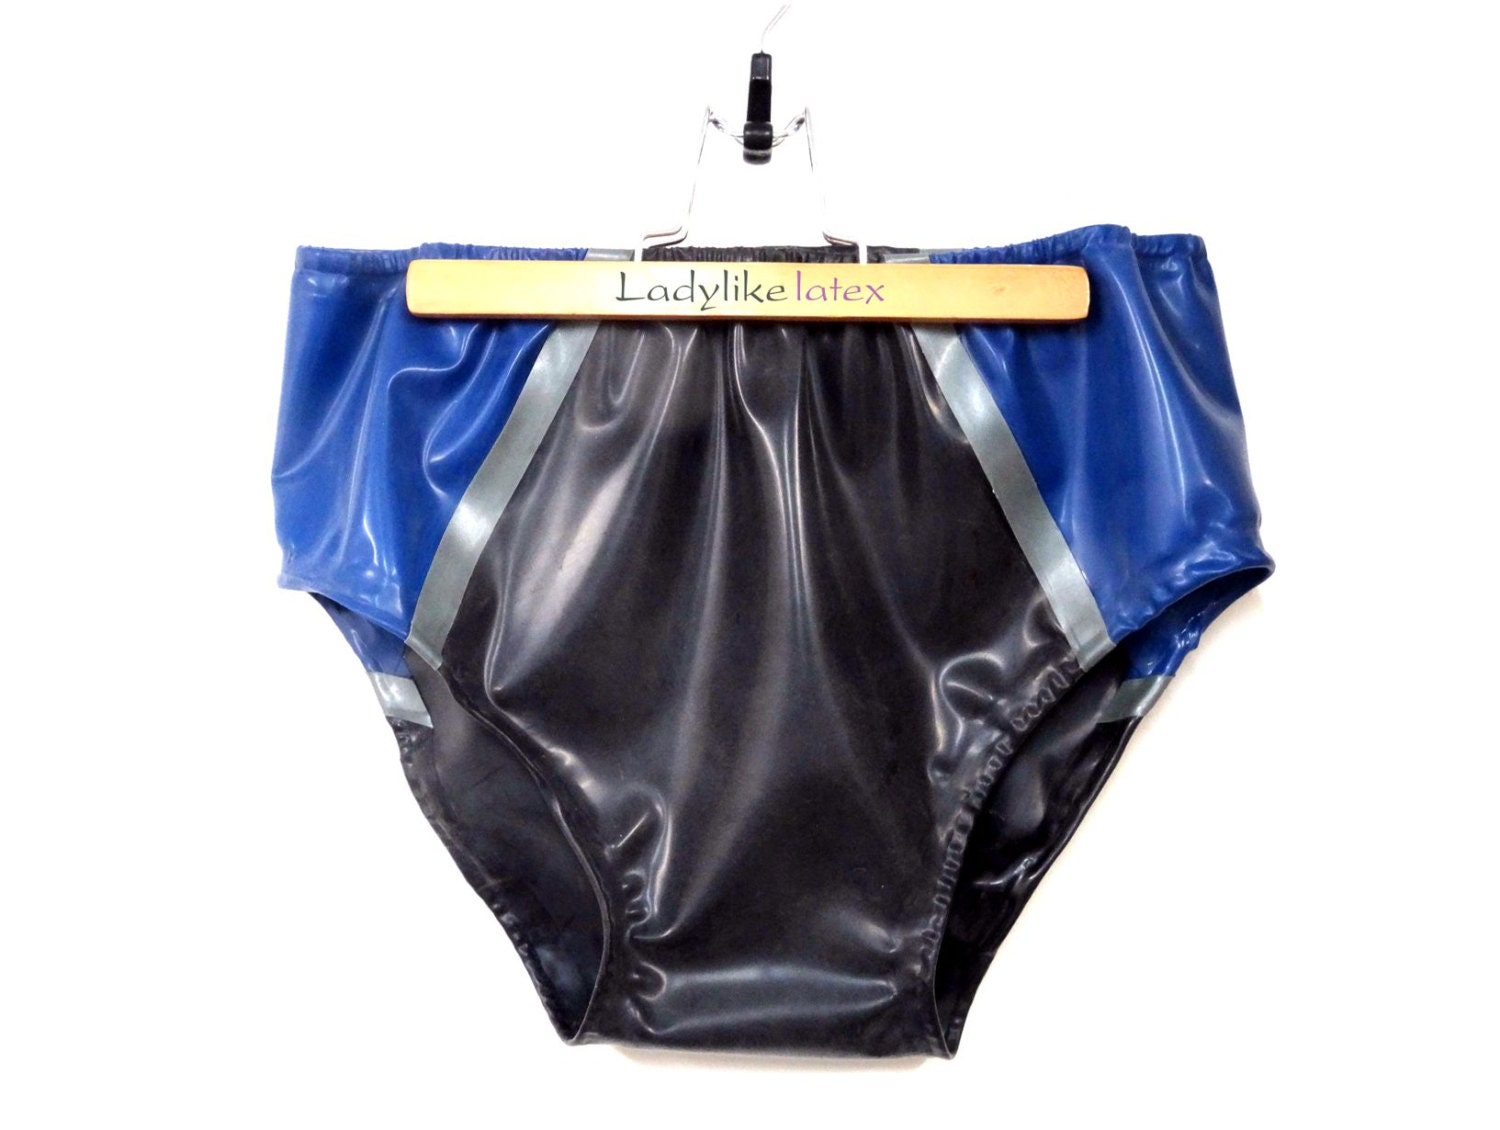 Mens Briefs With Elasticated Waist and Legs in Latex Rubber. | Etsy UK